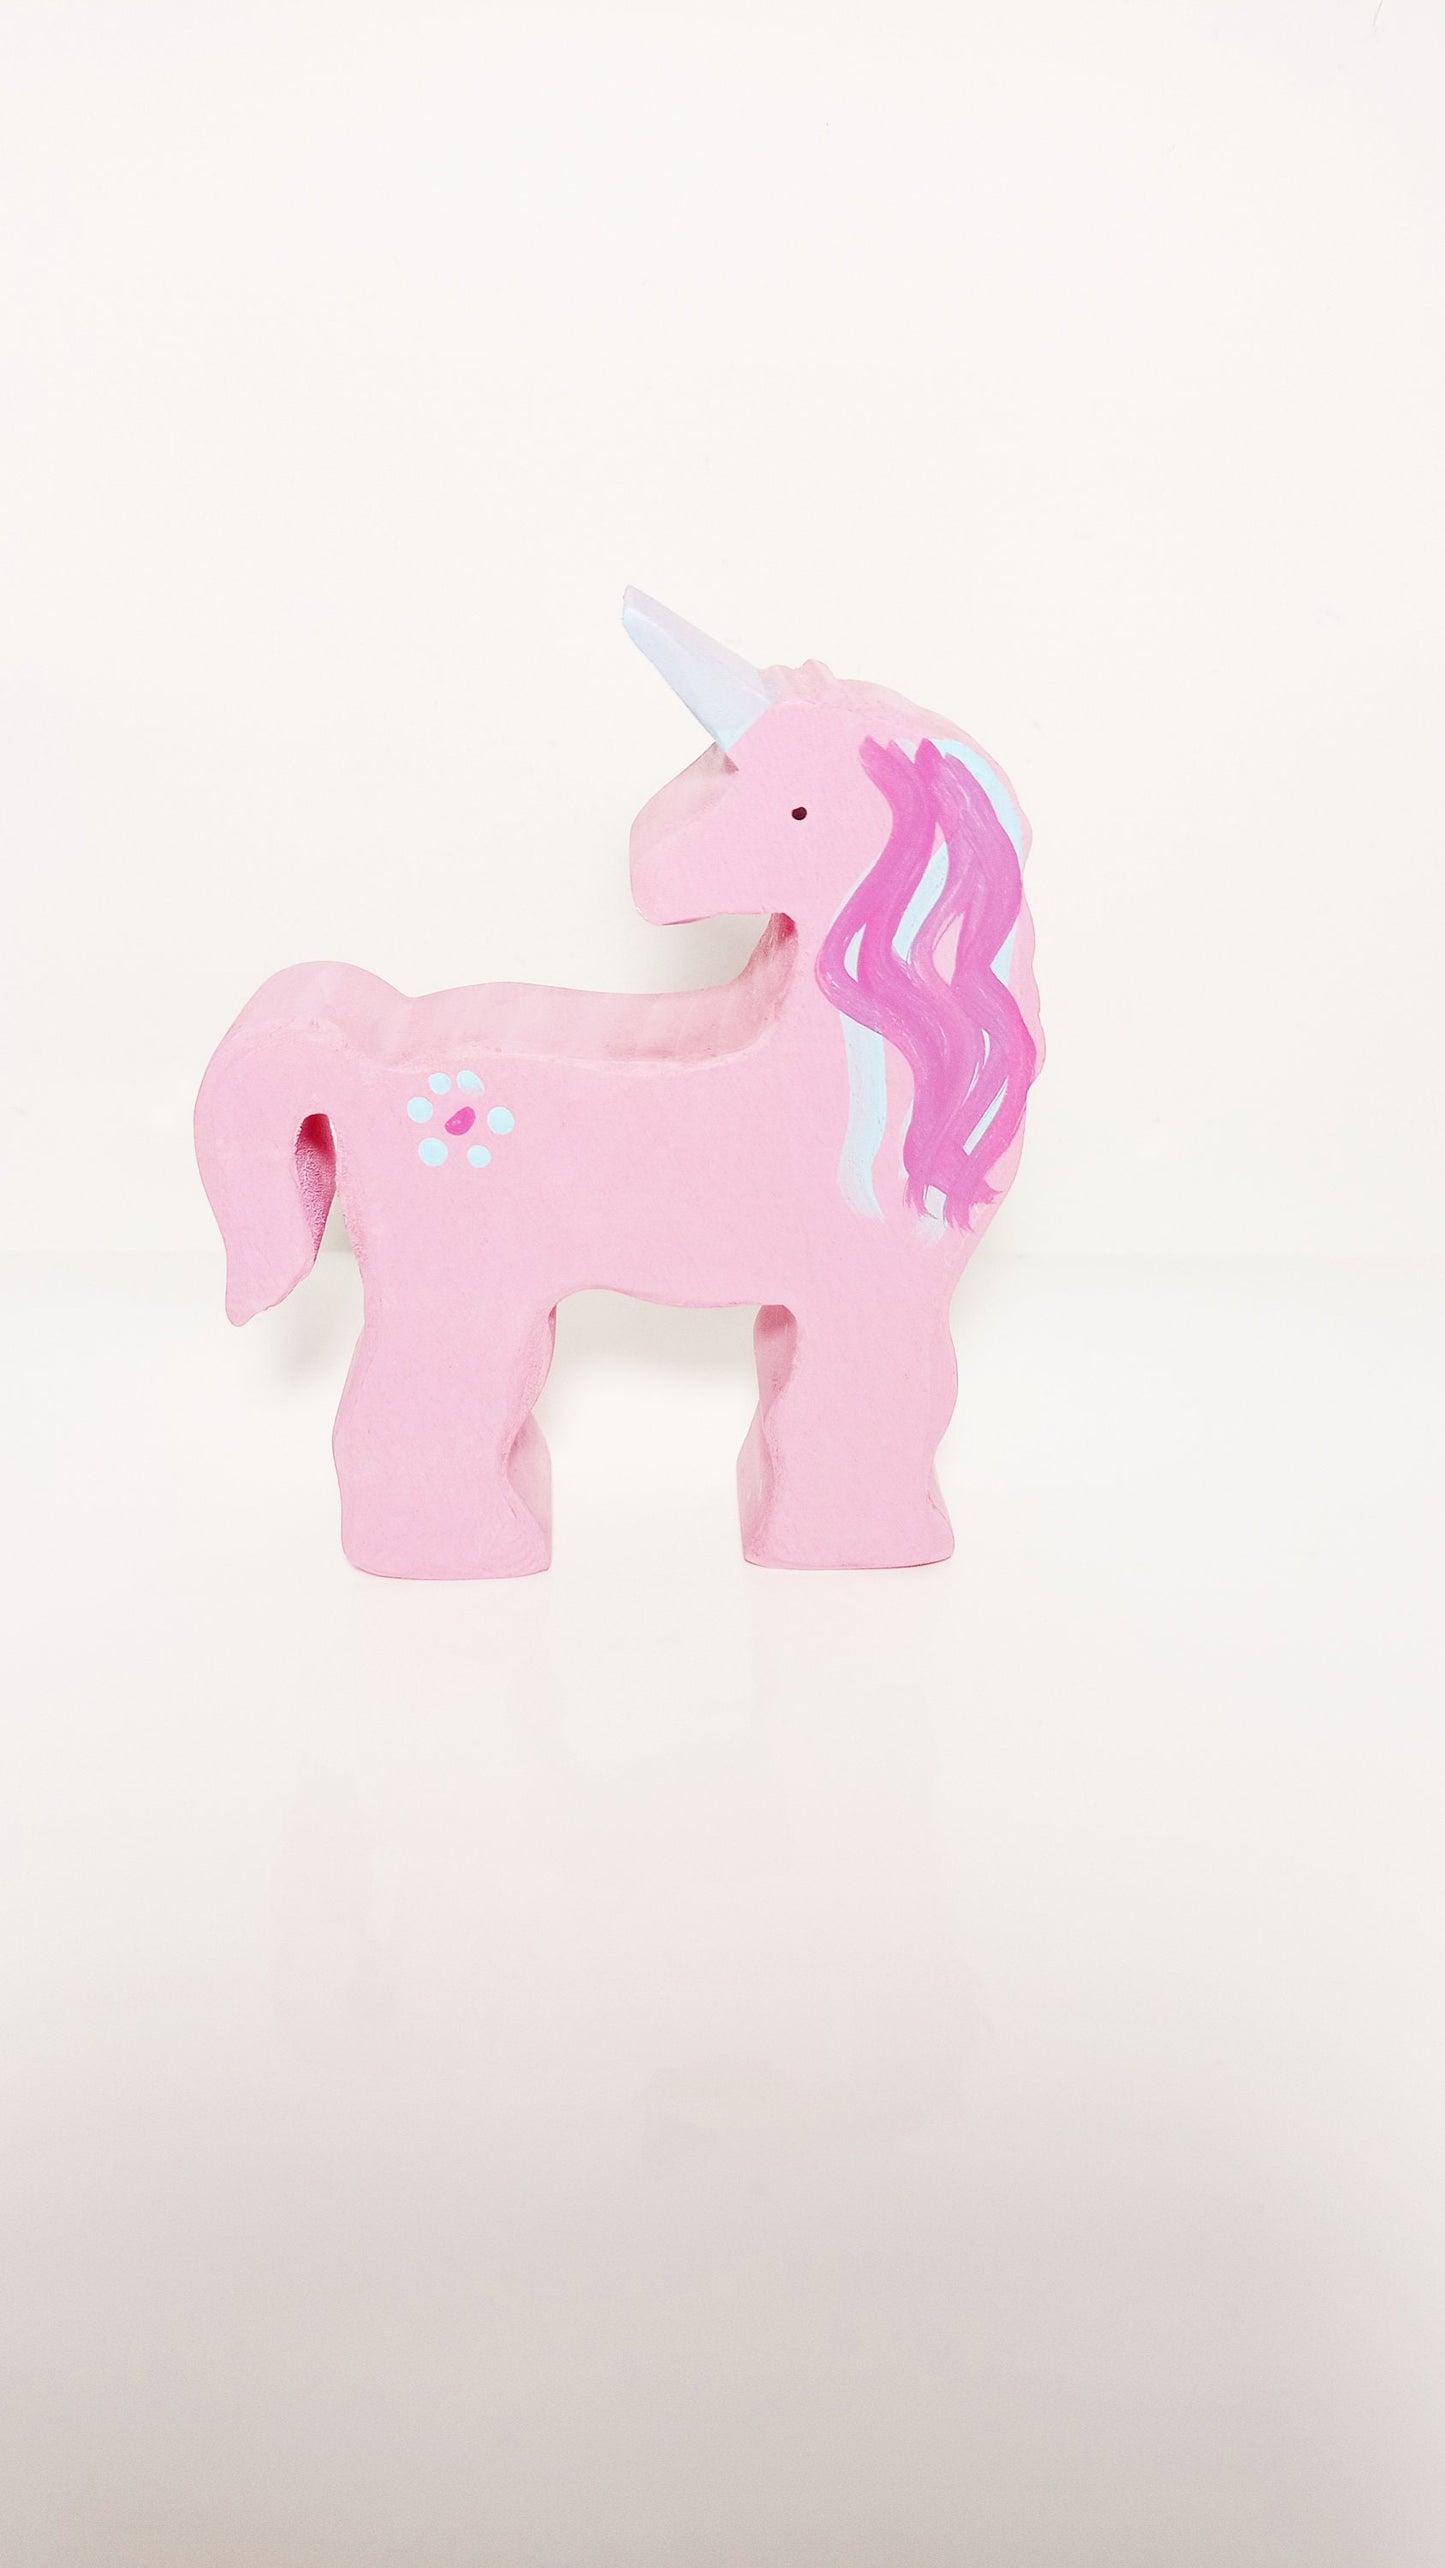 Unicorn wooden waldorf toy, blue unicorn wooden toy, imaginative play, open ended play, waldorf inspired, unicorns, gift for kids